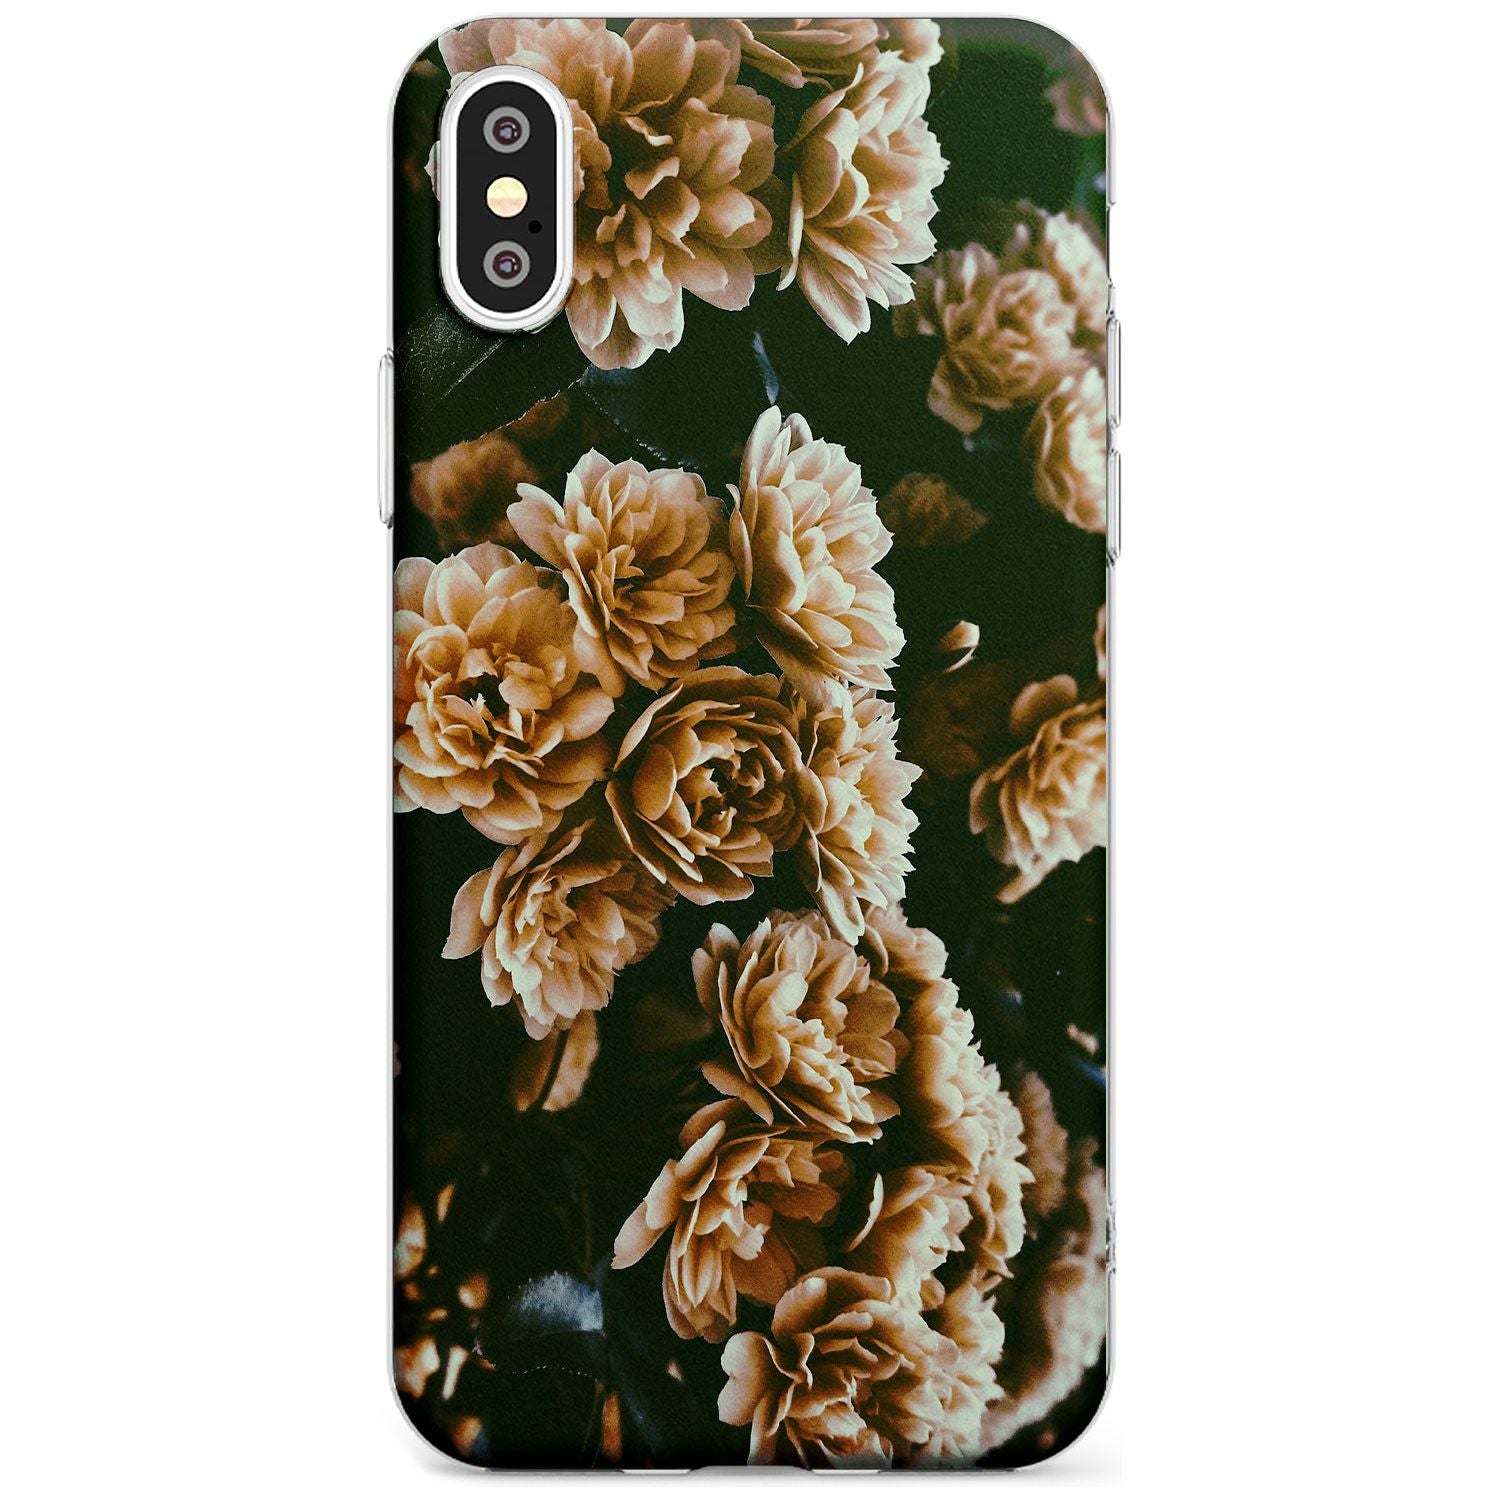 White Peonies - Real Floral Photographs Slim TPU Phone Case Warehouse X XS Max XR